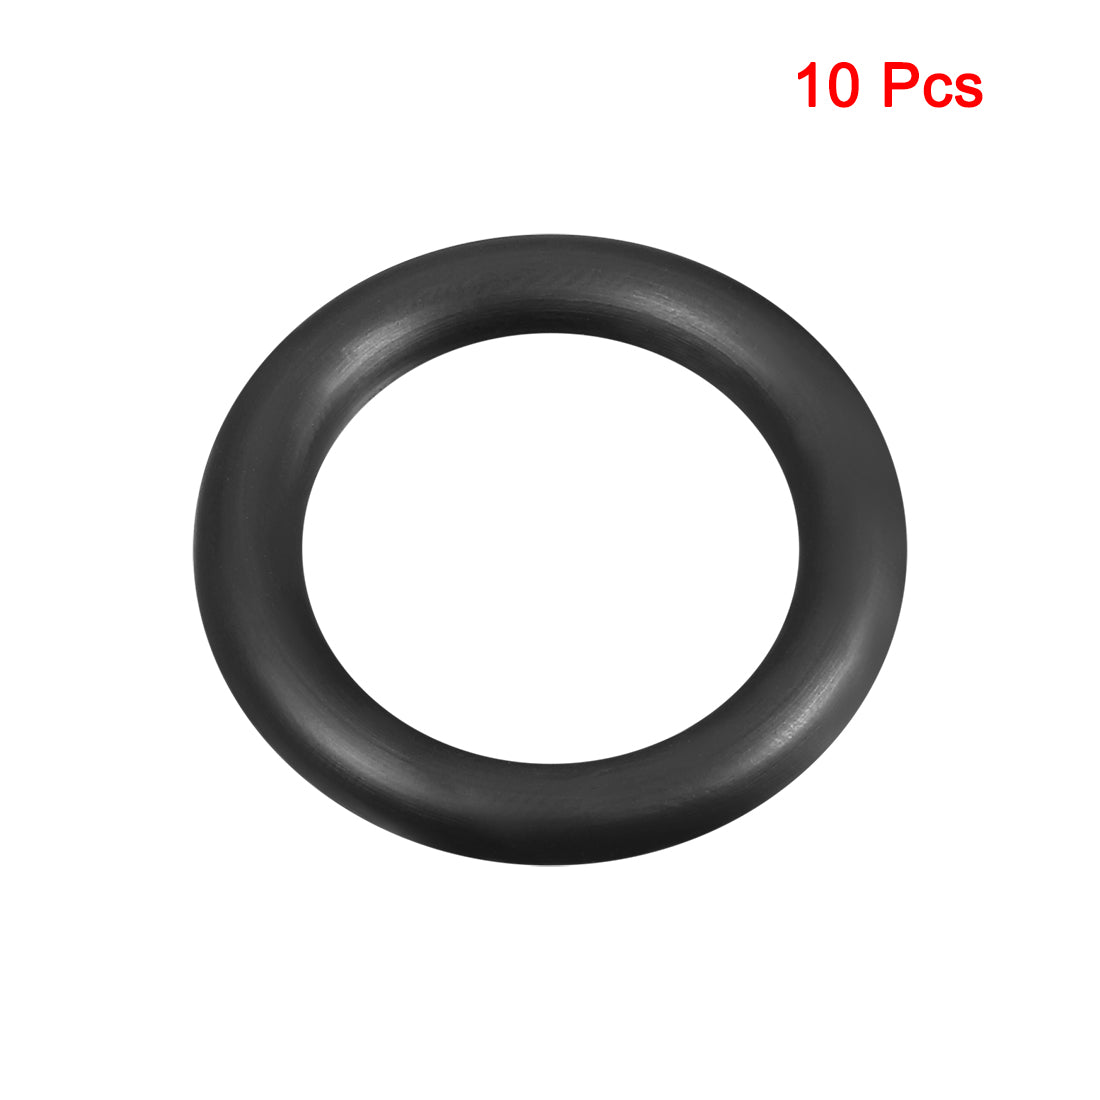 uxcell Uxcell O-Rings Nitrile Rubber 24mm x 34mm x 5mm Seal Rings Sealing Gasket 10pcs